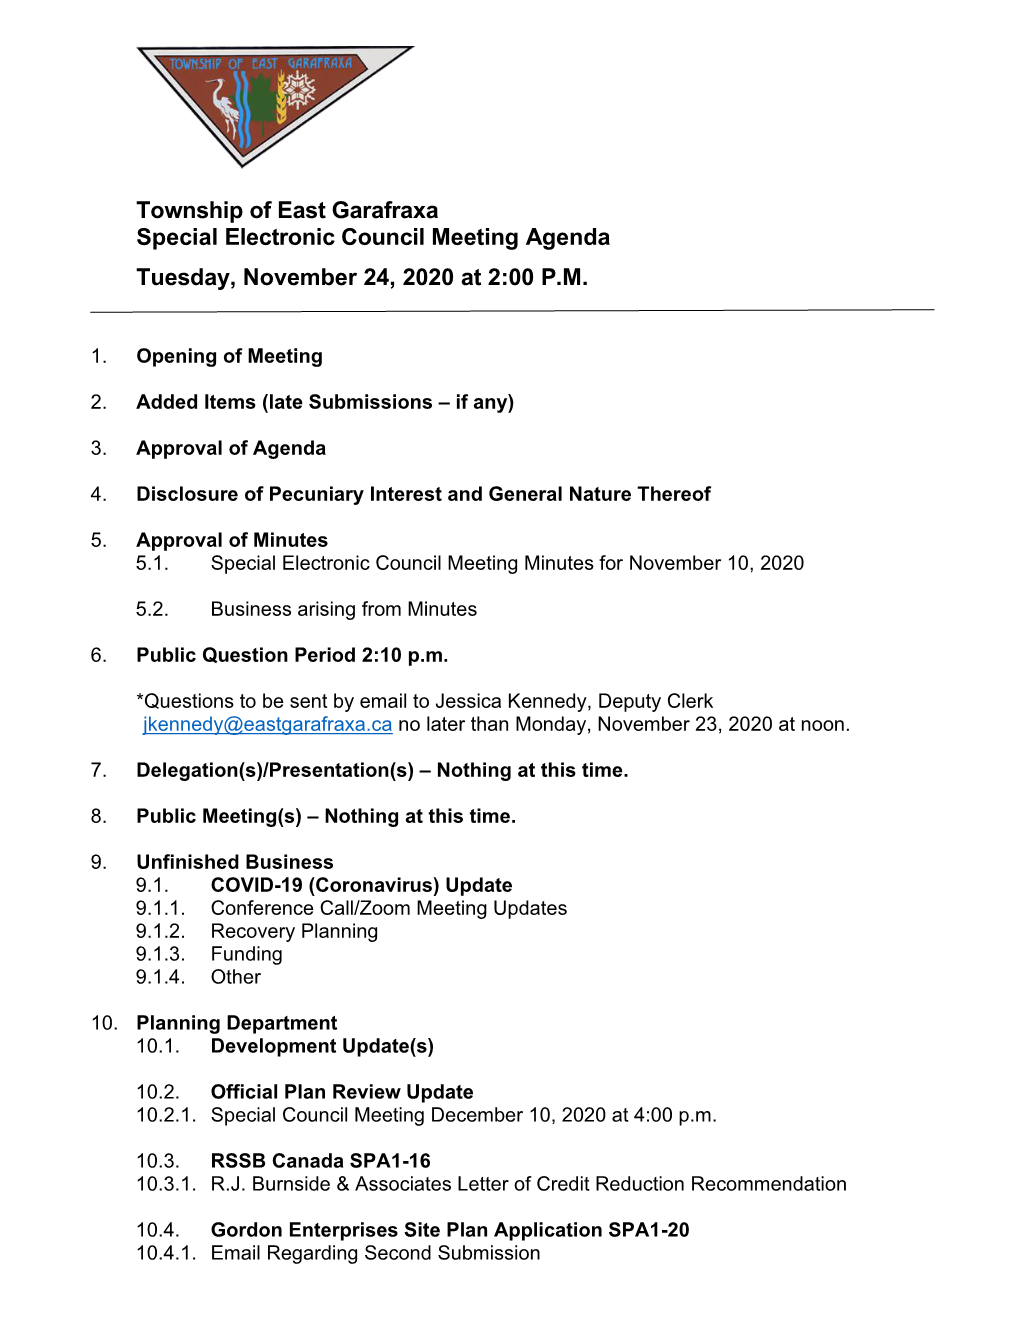 Township of East Garafraxa Special Electronic Council Meeting Agenda Tuesday, November 24, 2020 at 2:00 P.M